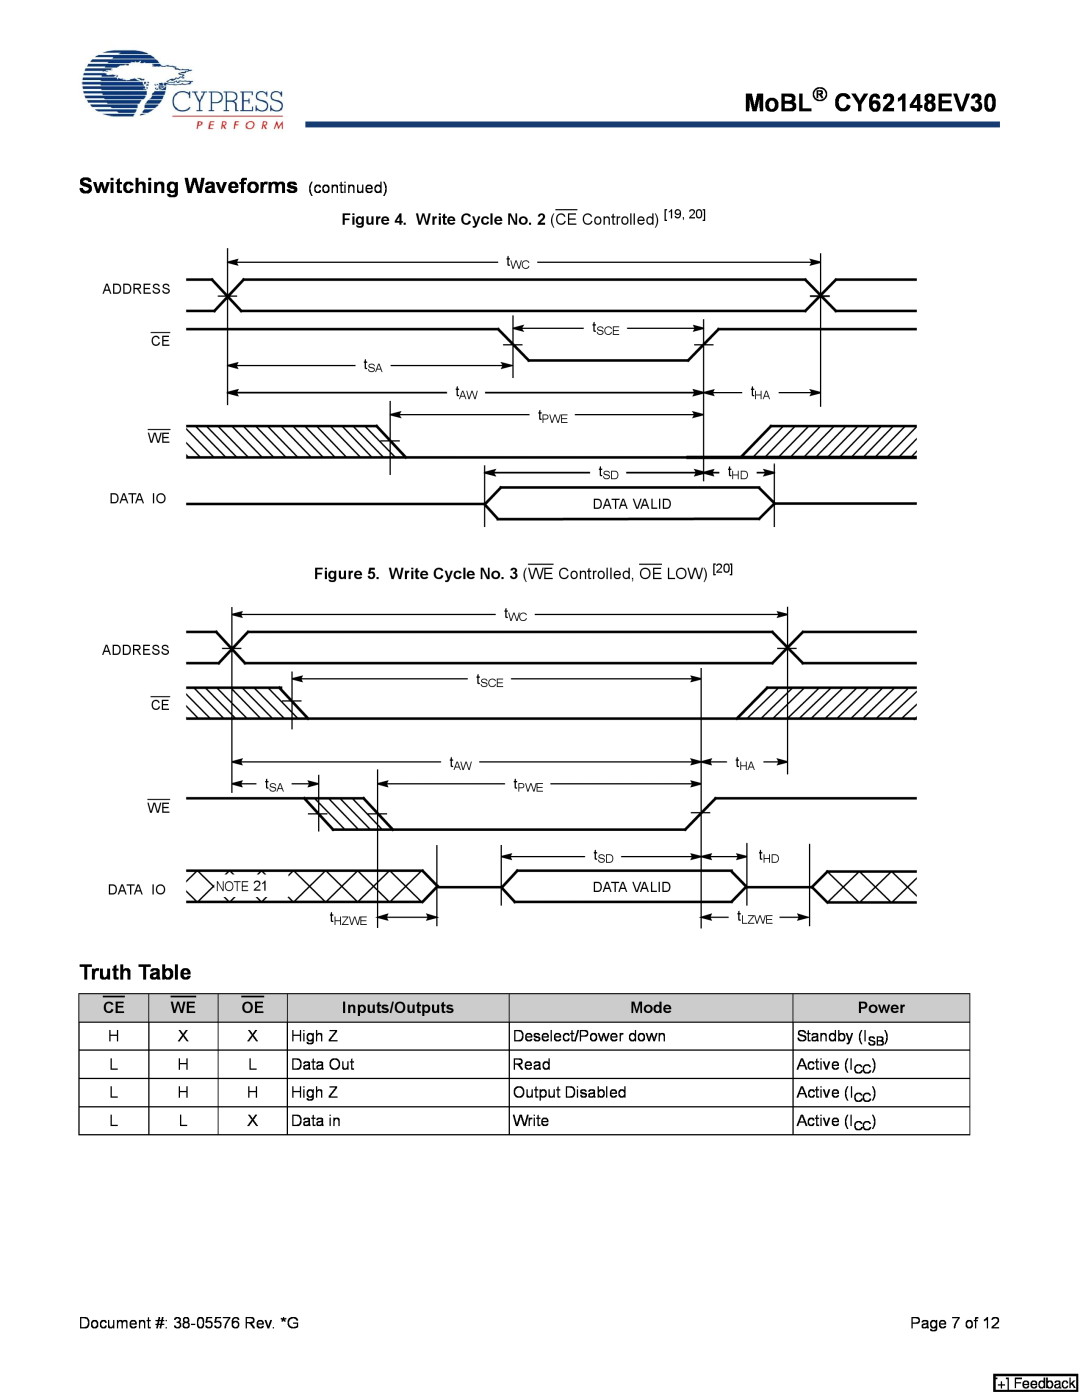 Cypress CY62148EV30 Switching Waveforms continued, Truth Table, Write Cycle No. 2 CE Controlled 19, Inputs/Outputs, Mode 